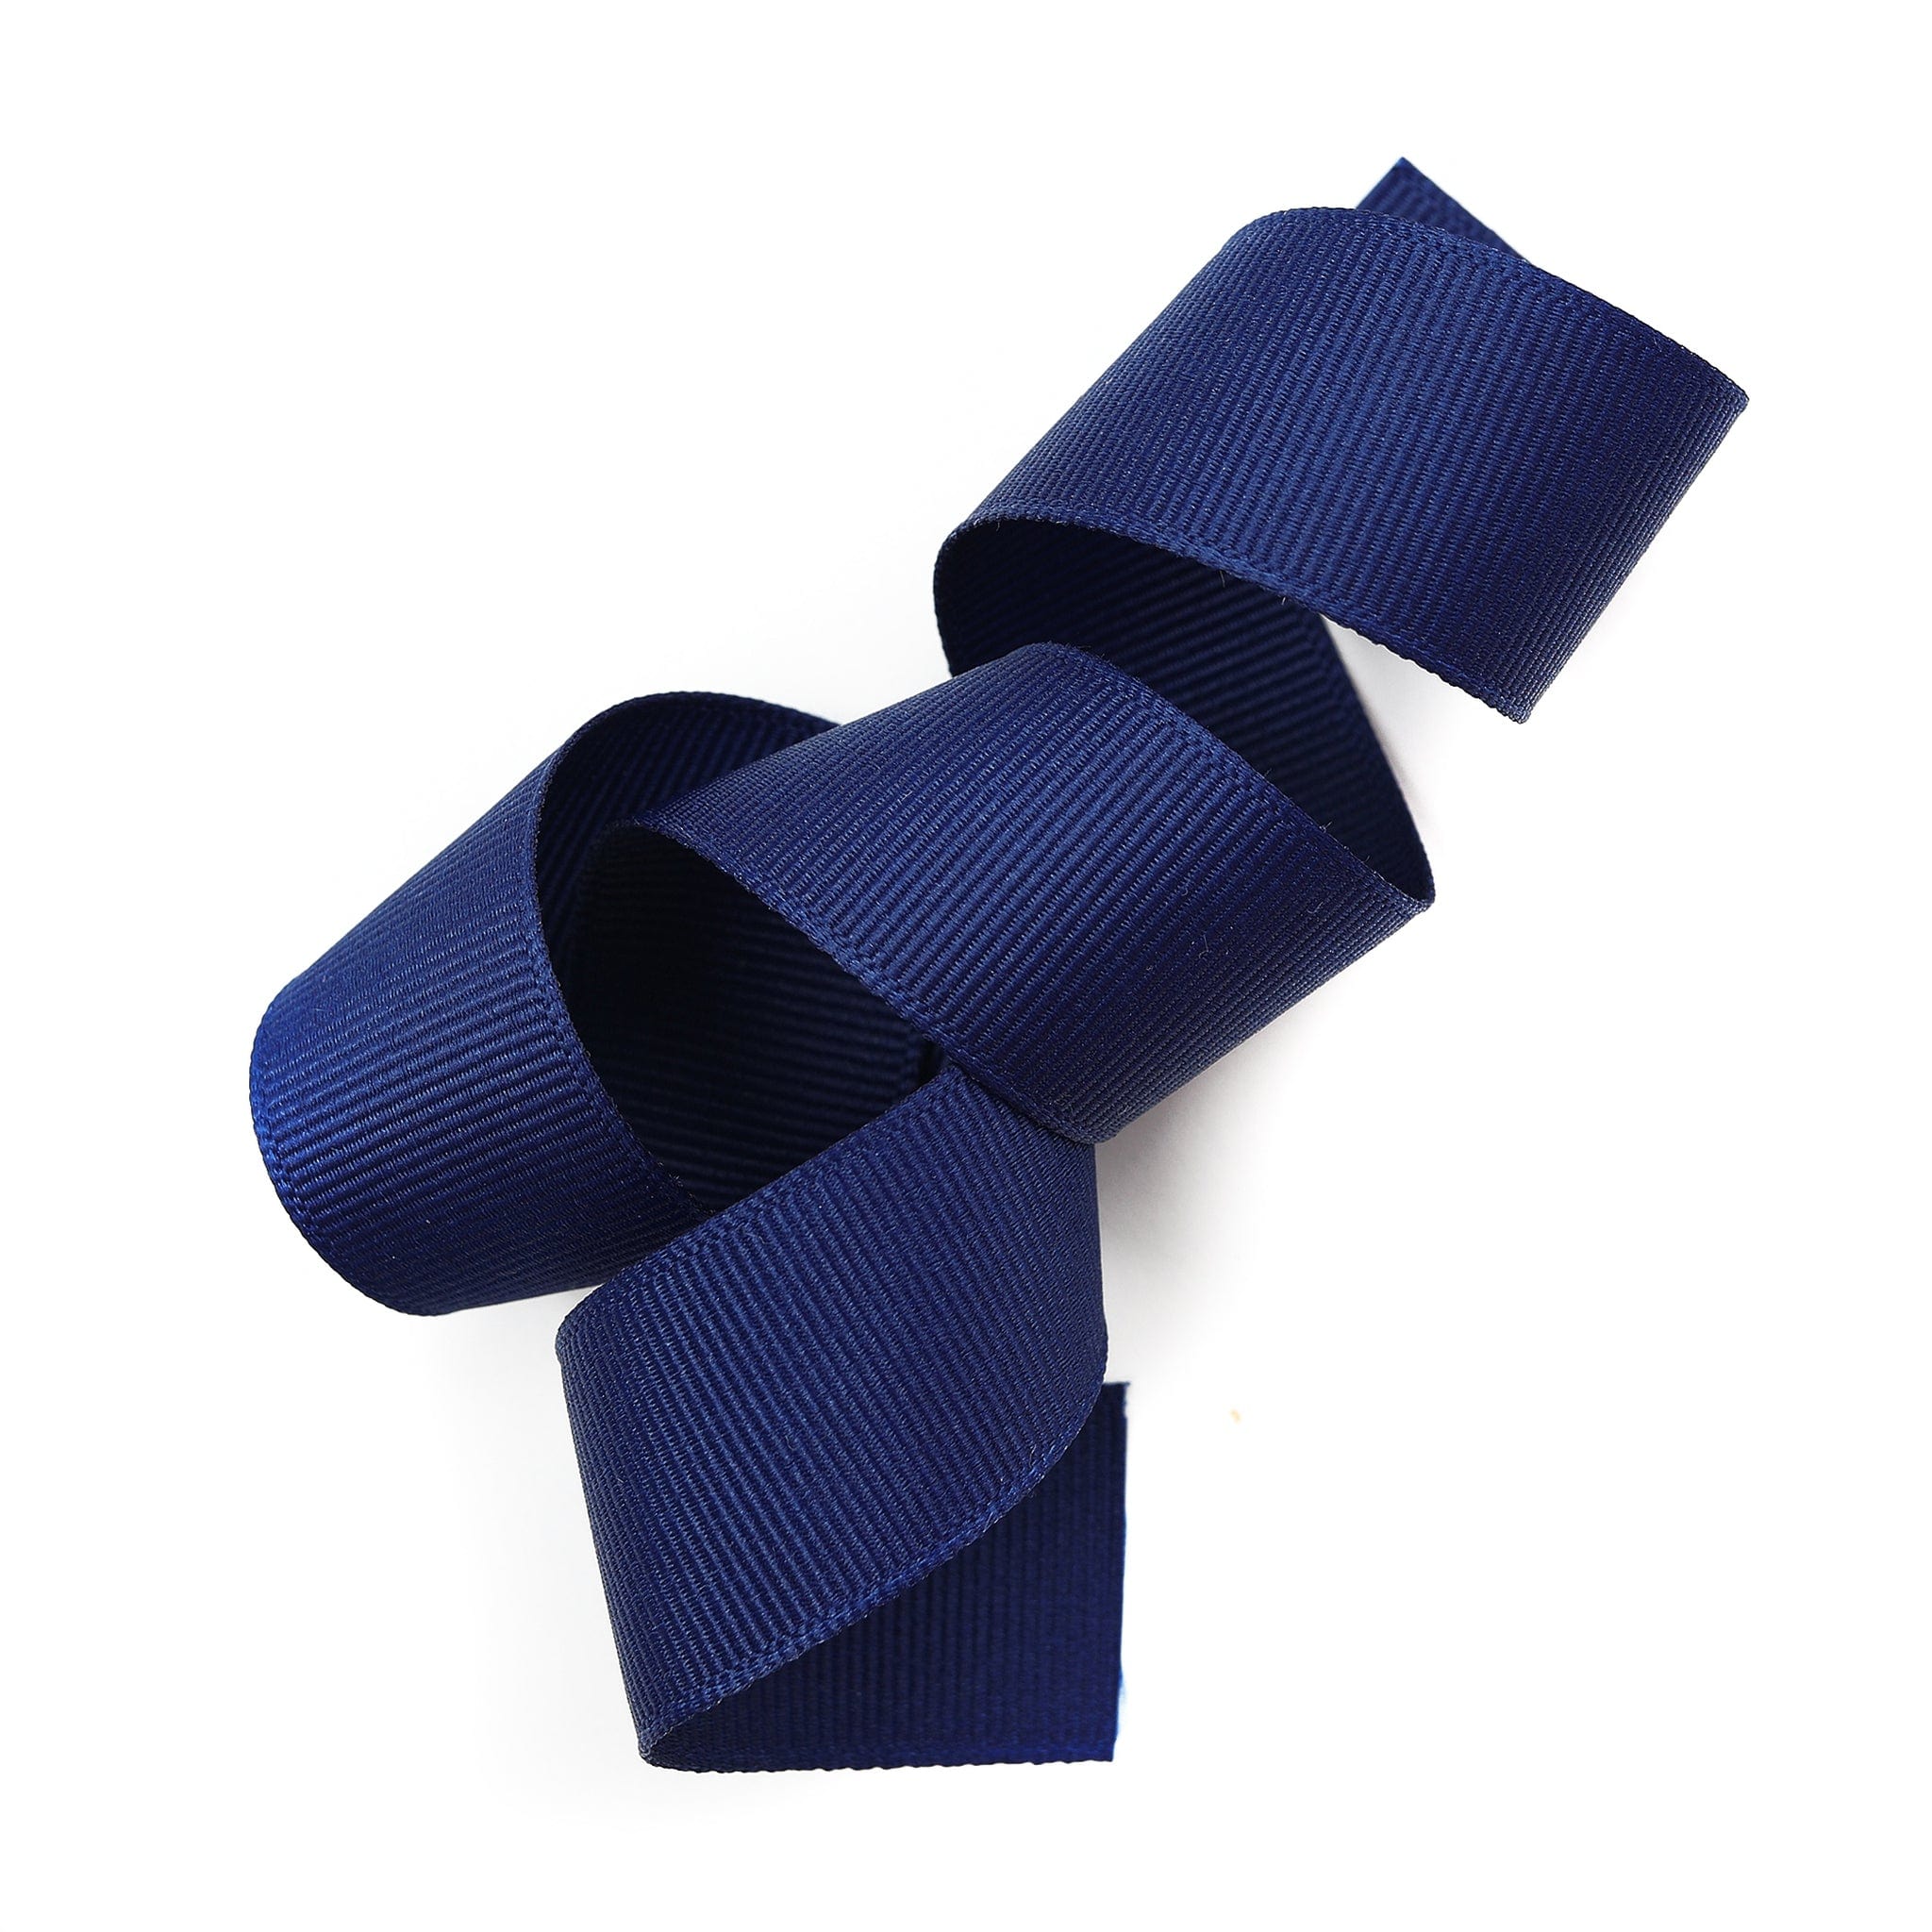 LEEQE Navy Blue Grosgrain Ribbon 2 inch x 25 Yards Navy Blue Ribbon for Gift Package Wrapping Wreath Baby Shower and Other Projects